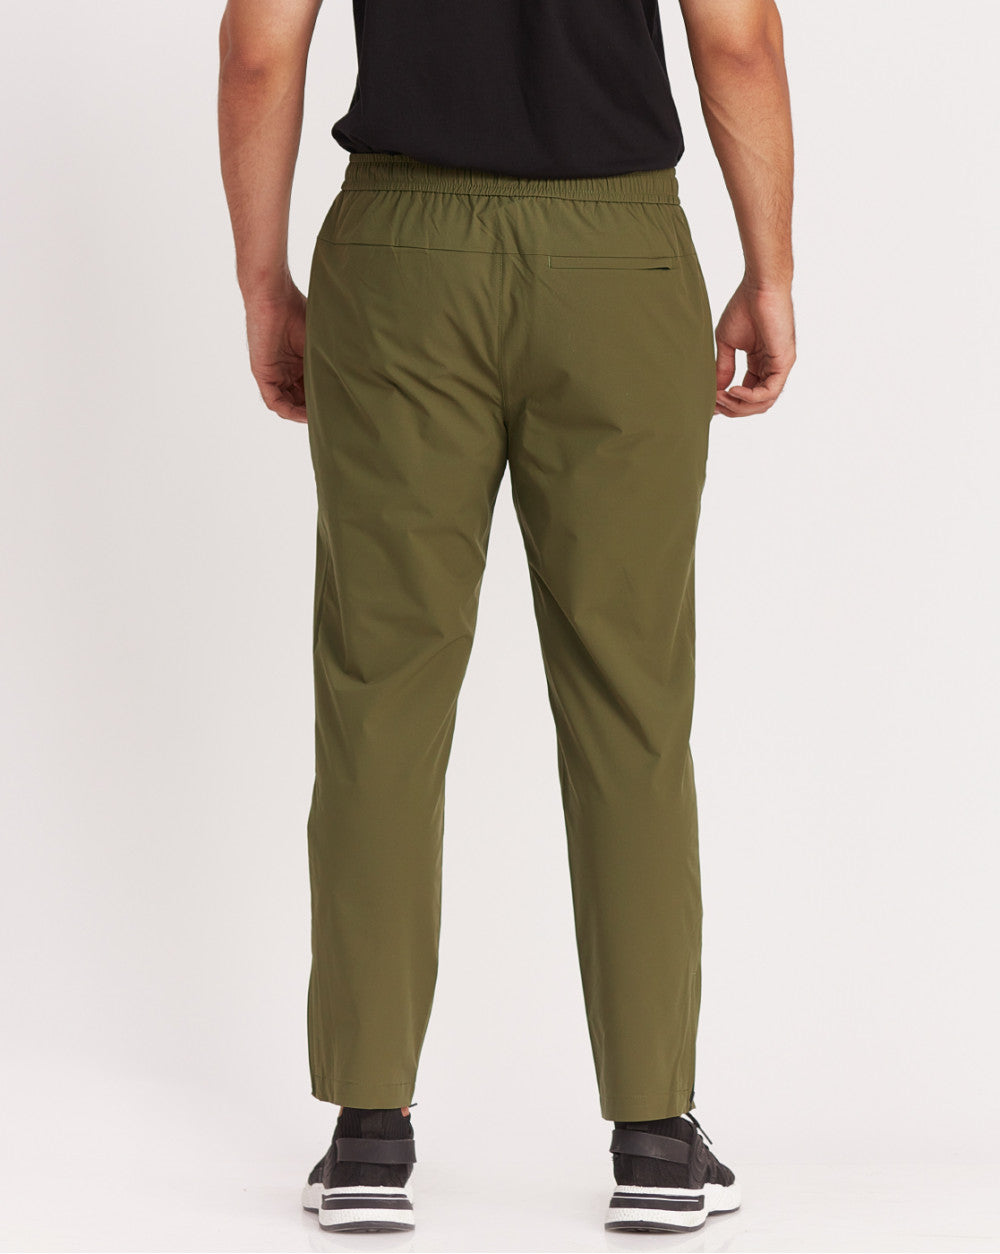 Slim Fit Performance Tech Joggers - Olive